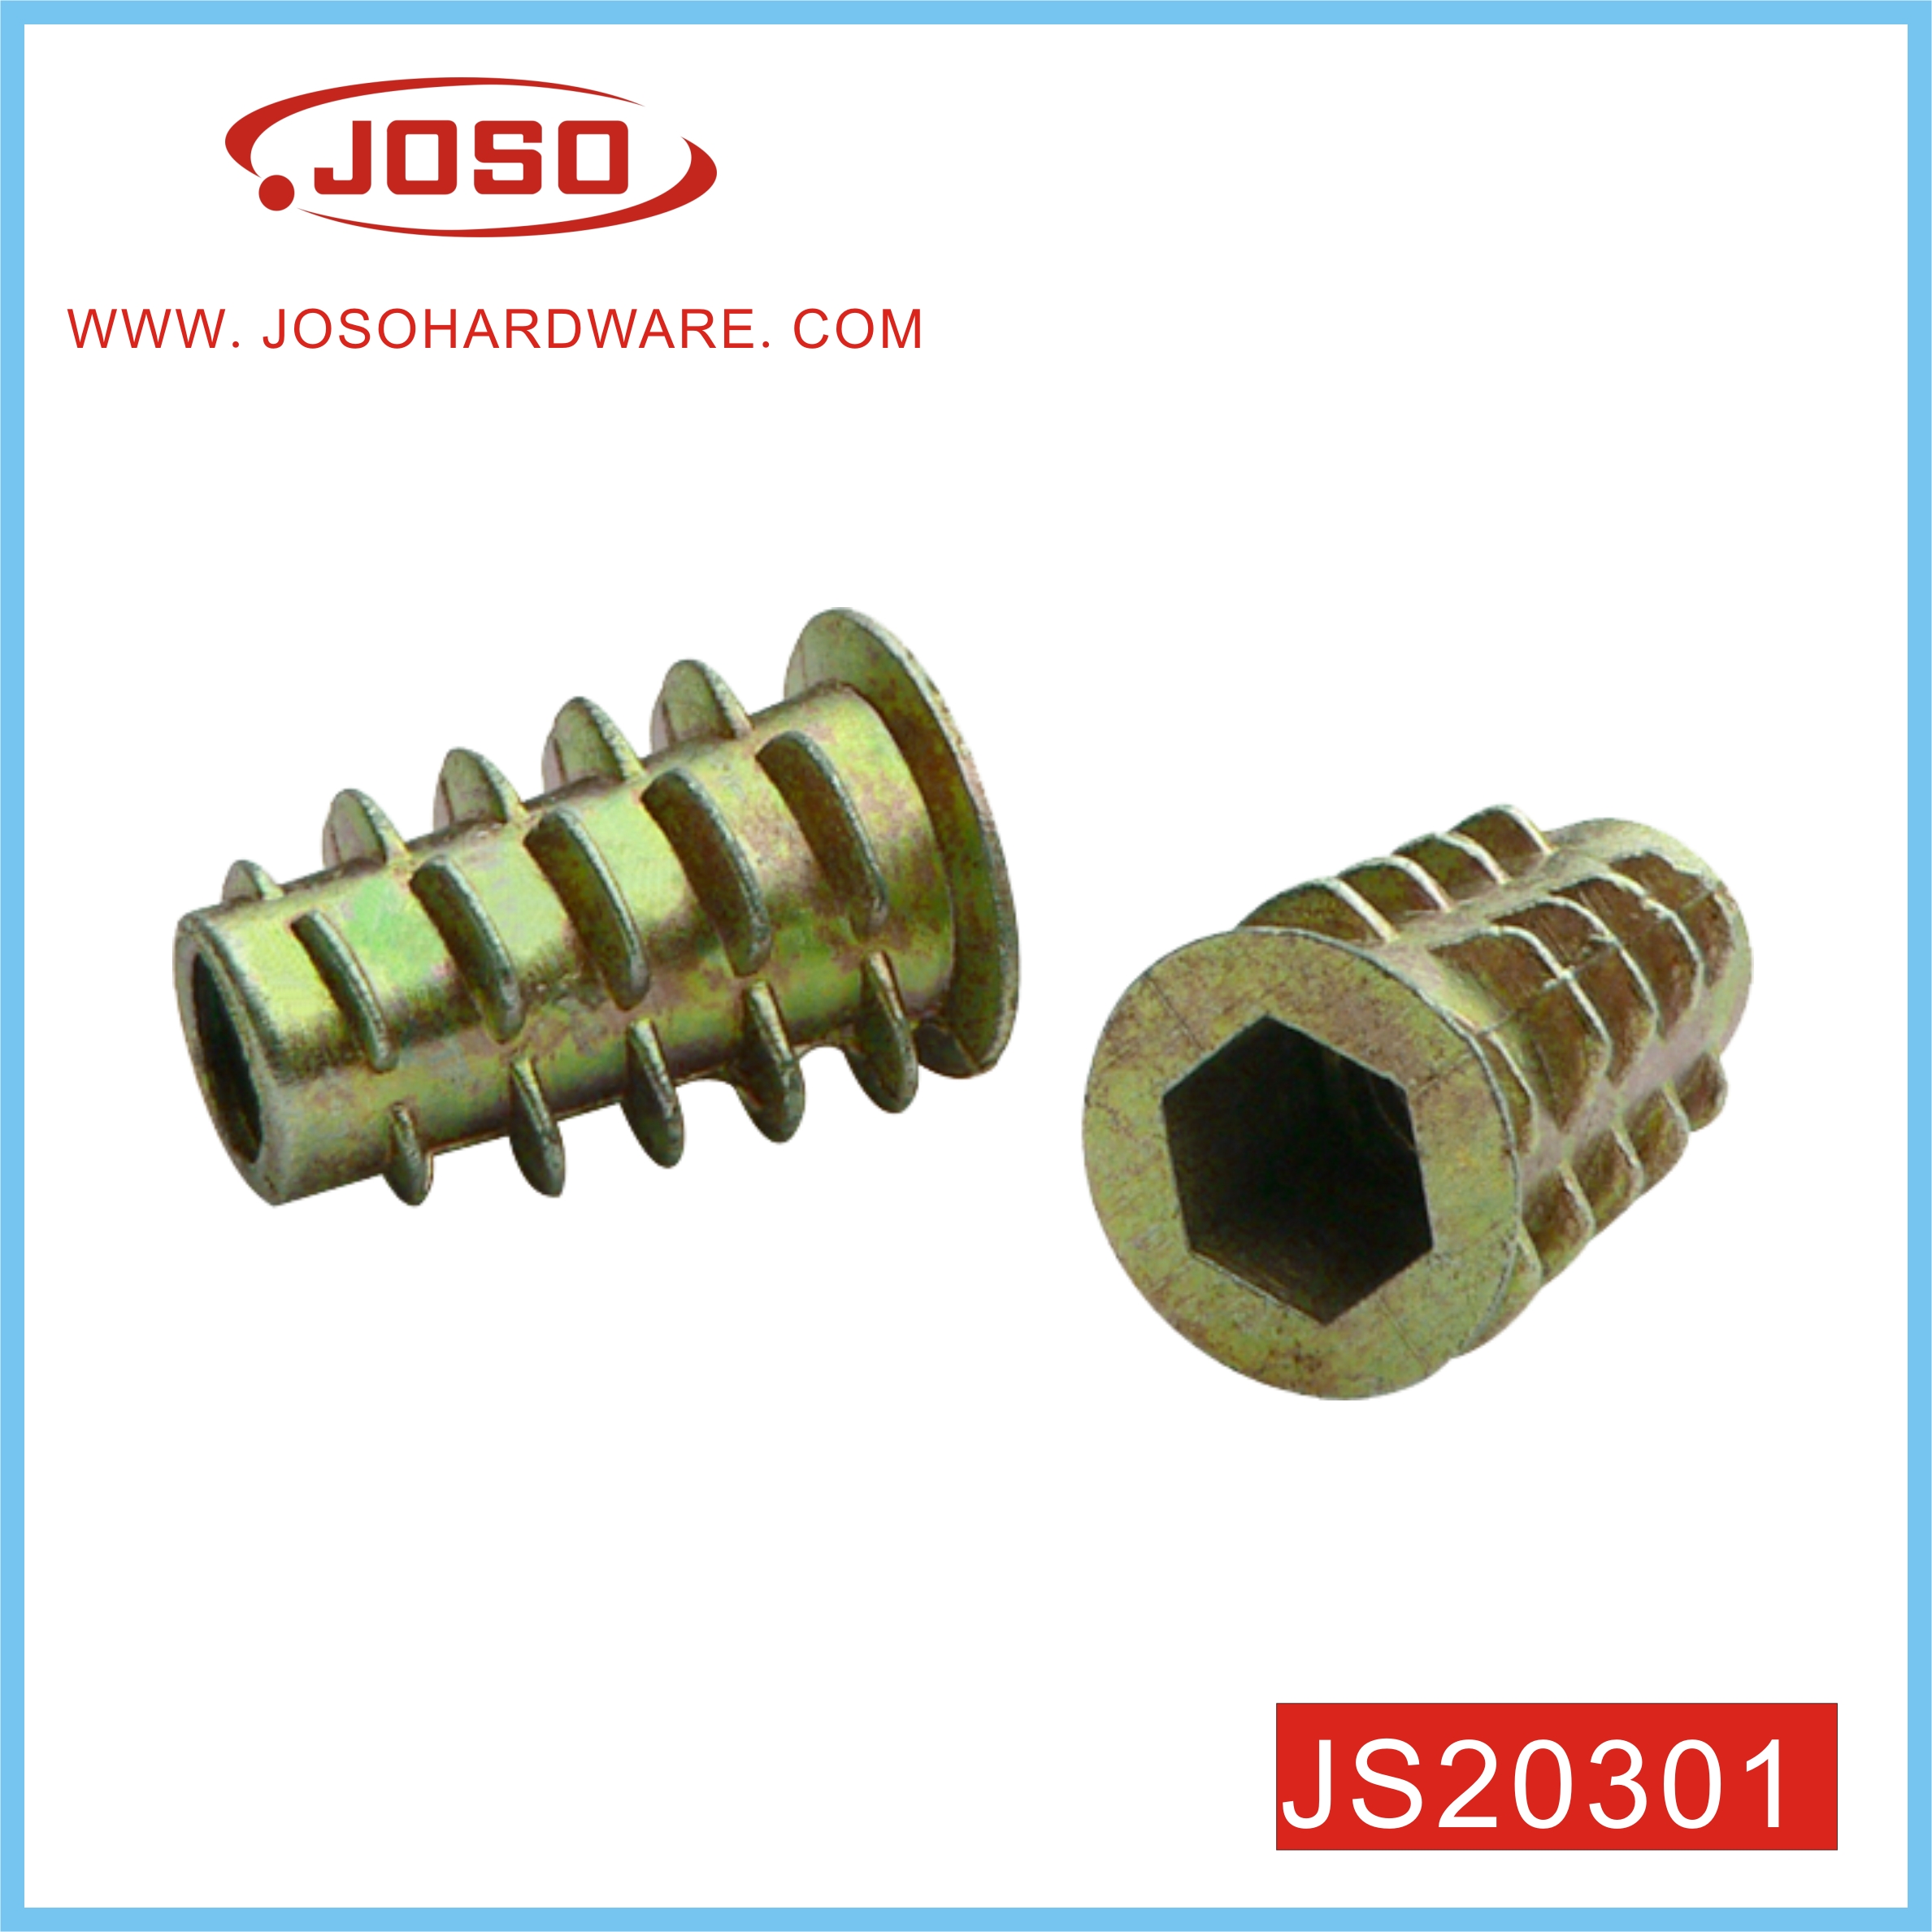 OEM Factory Made Zinc Plated Furniture Nut 